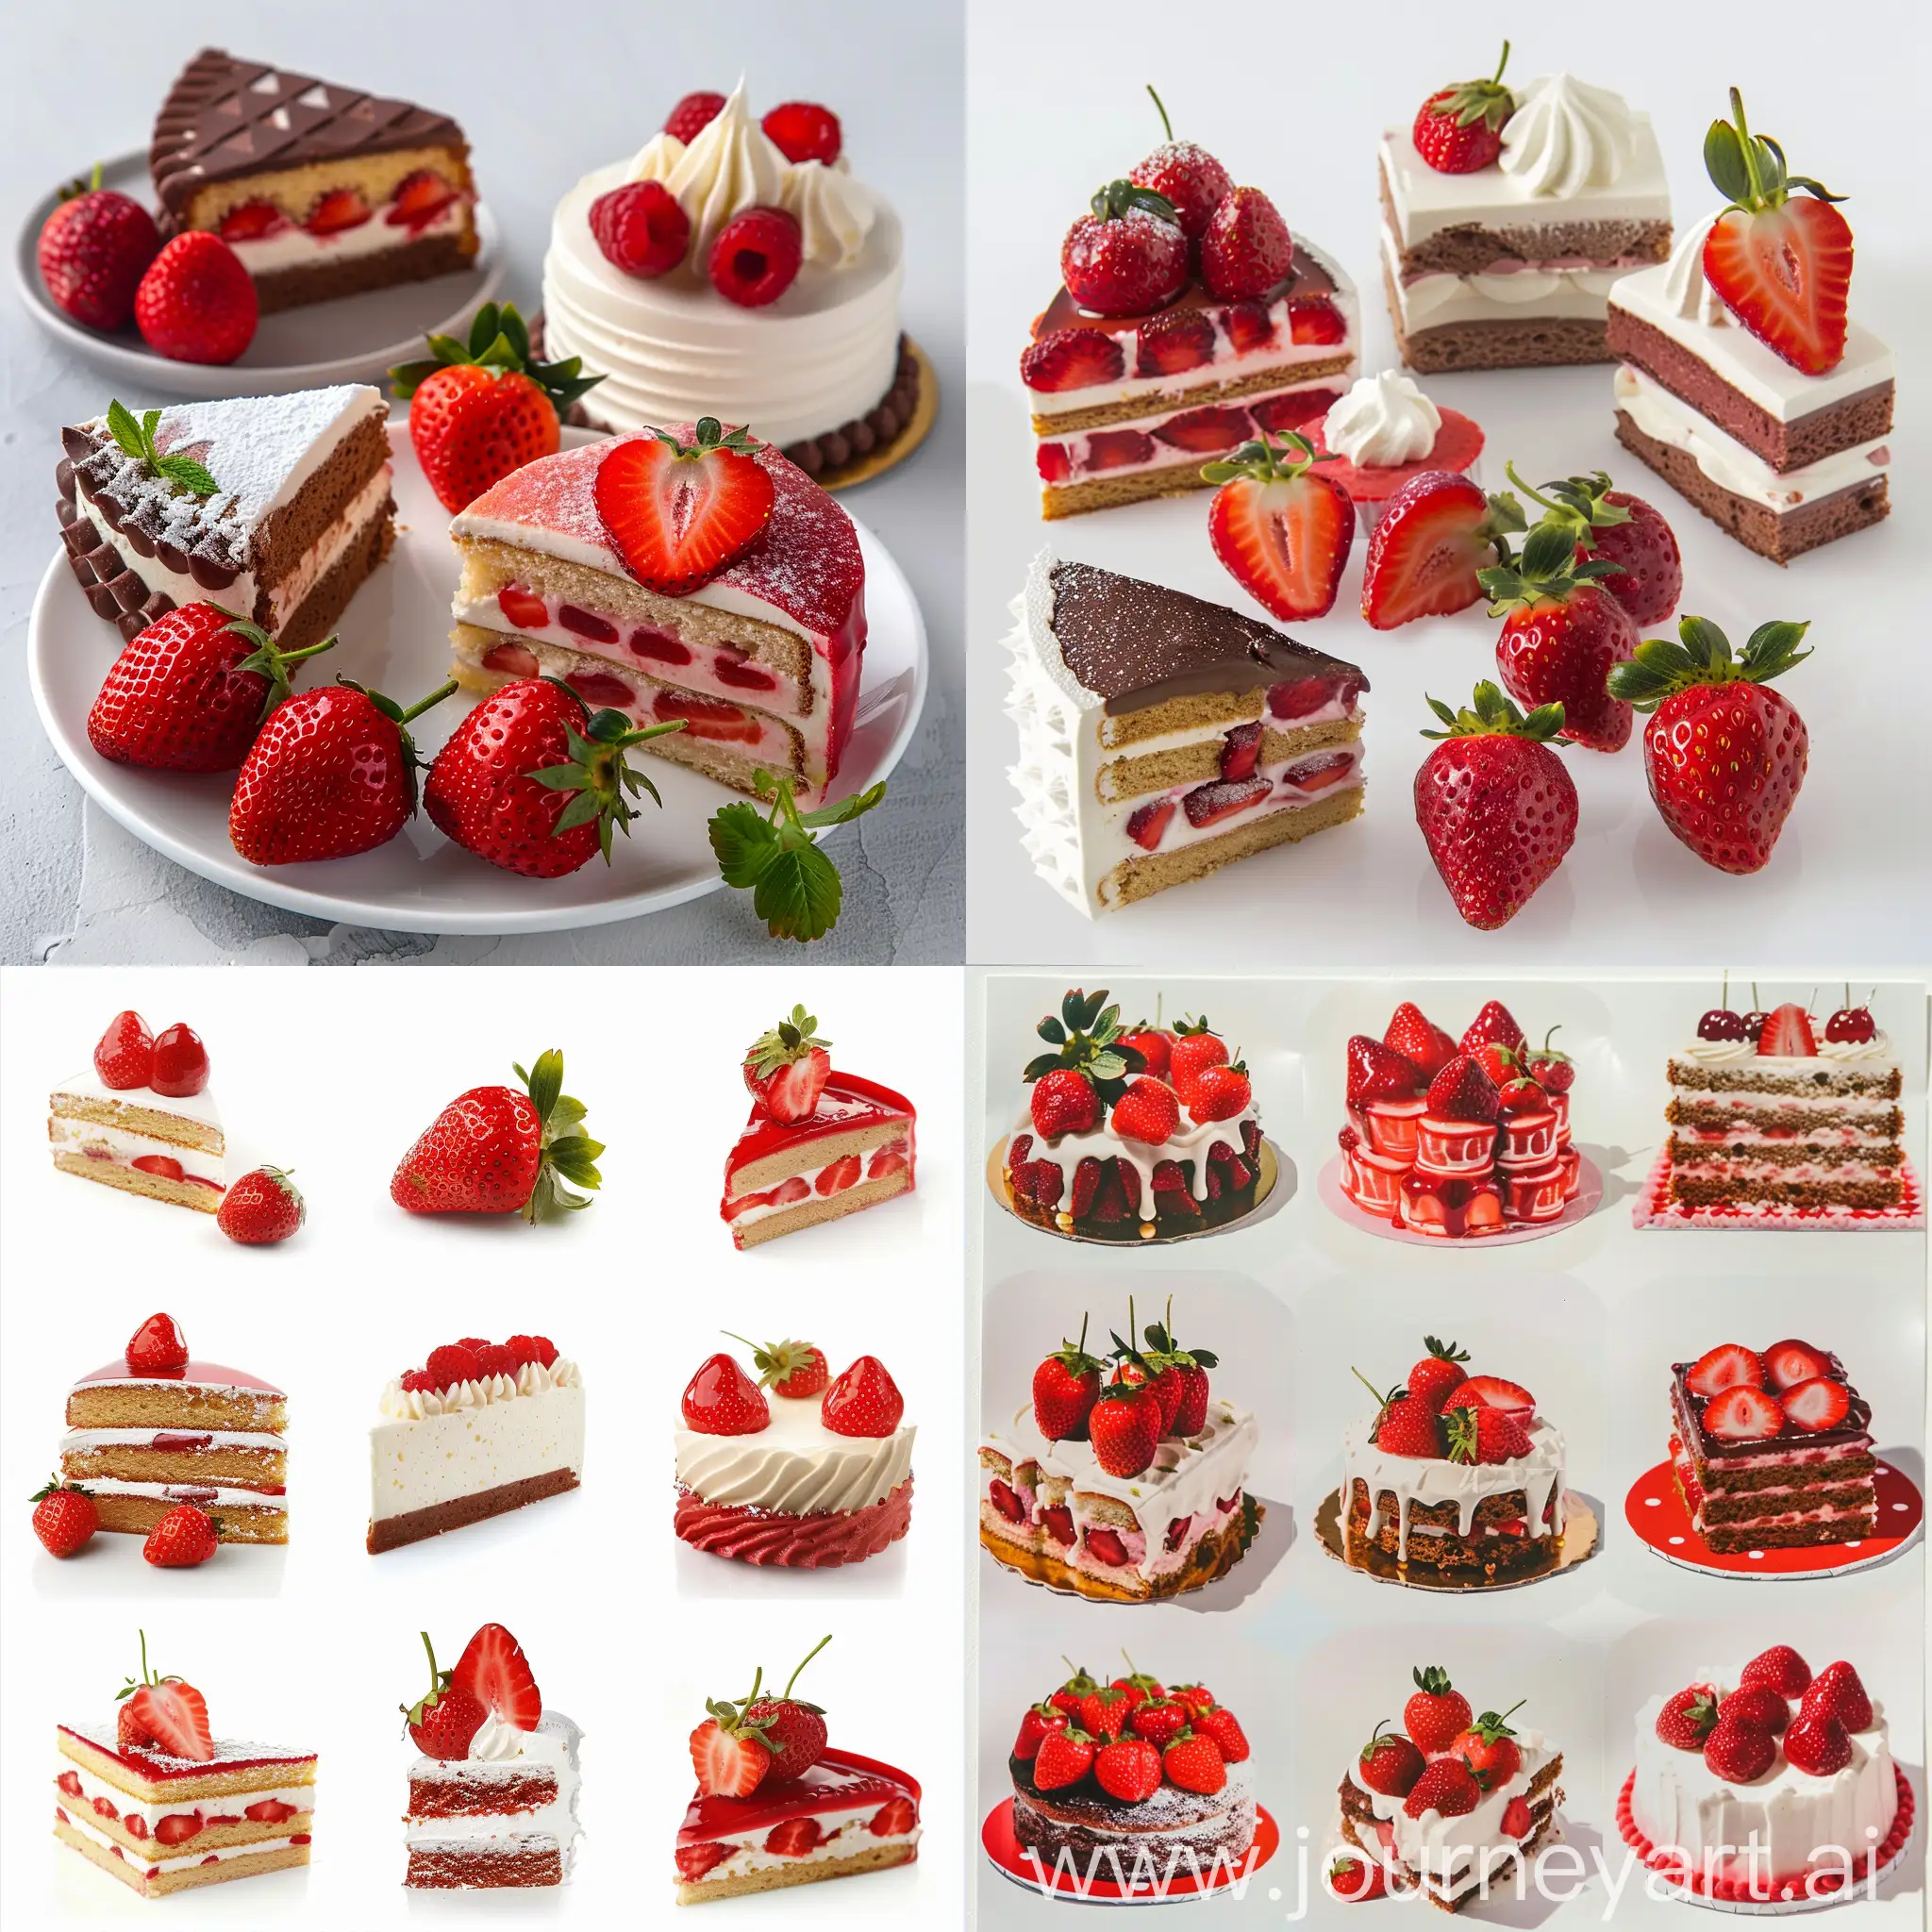 Varieties-of-Strawberry-Cakes-Sweet-Delights-on-a-White-Canvas